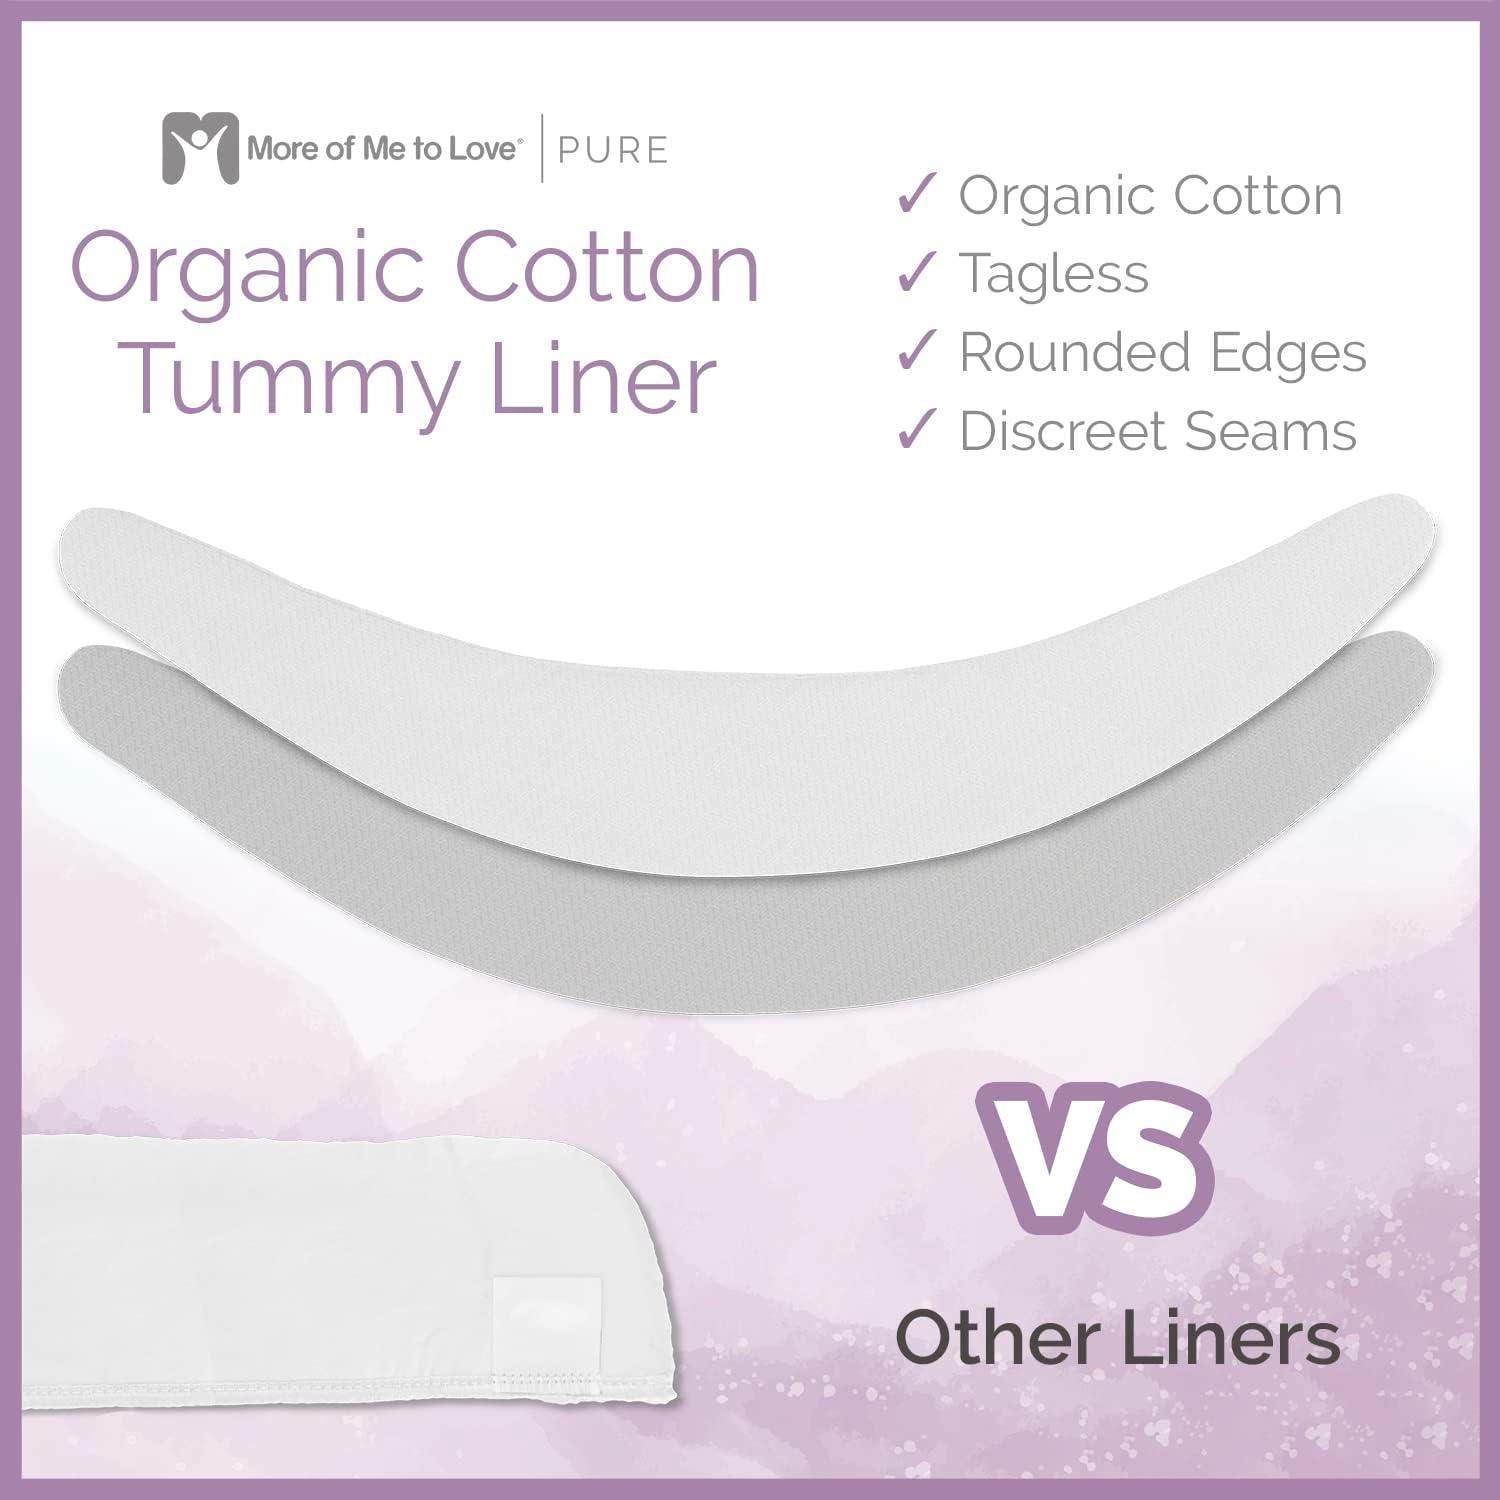 Bamboo Tummy Liners